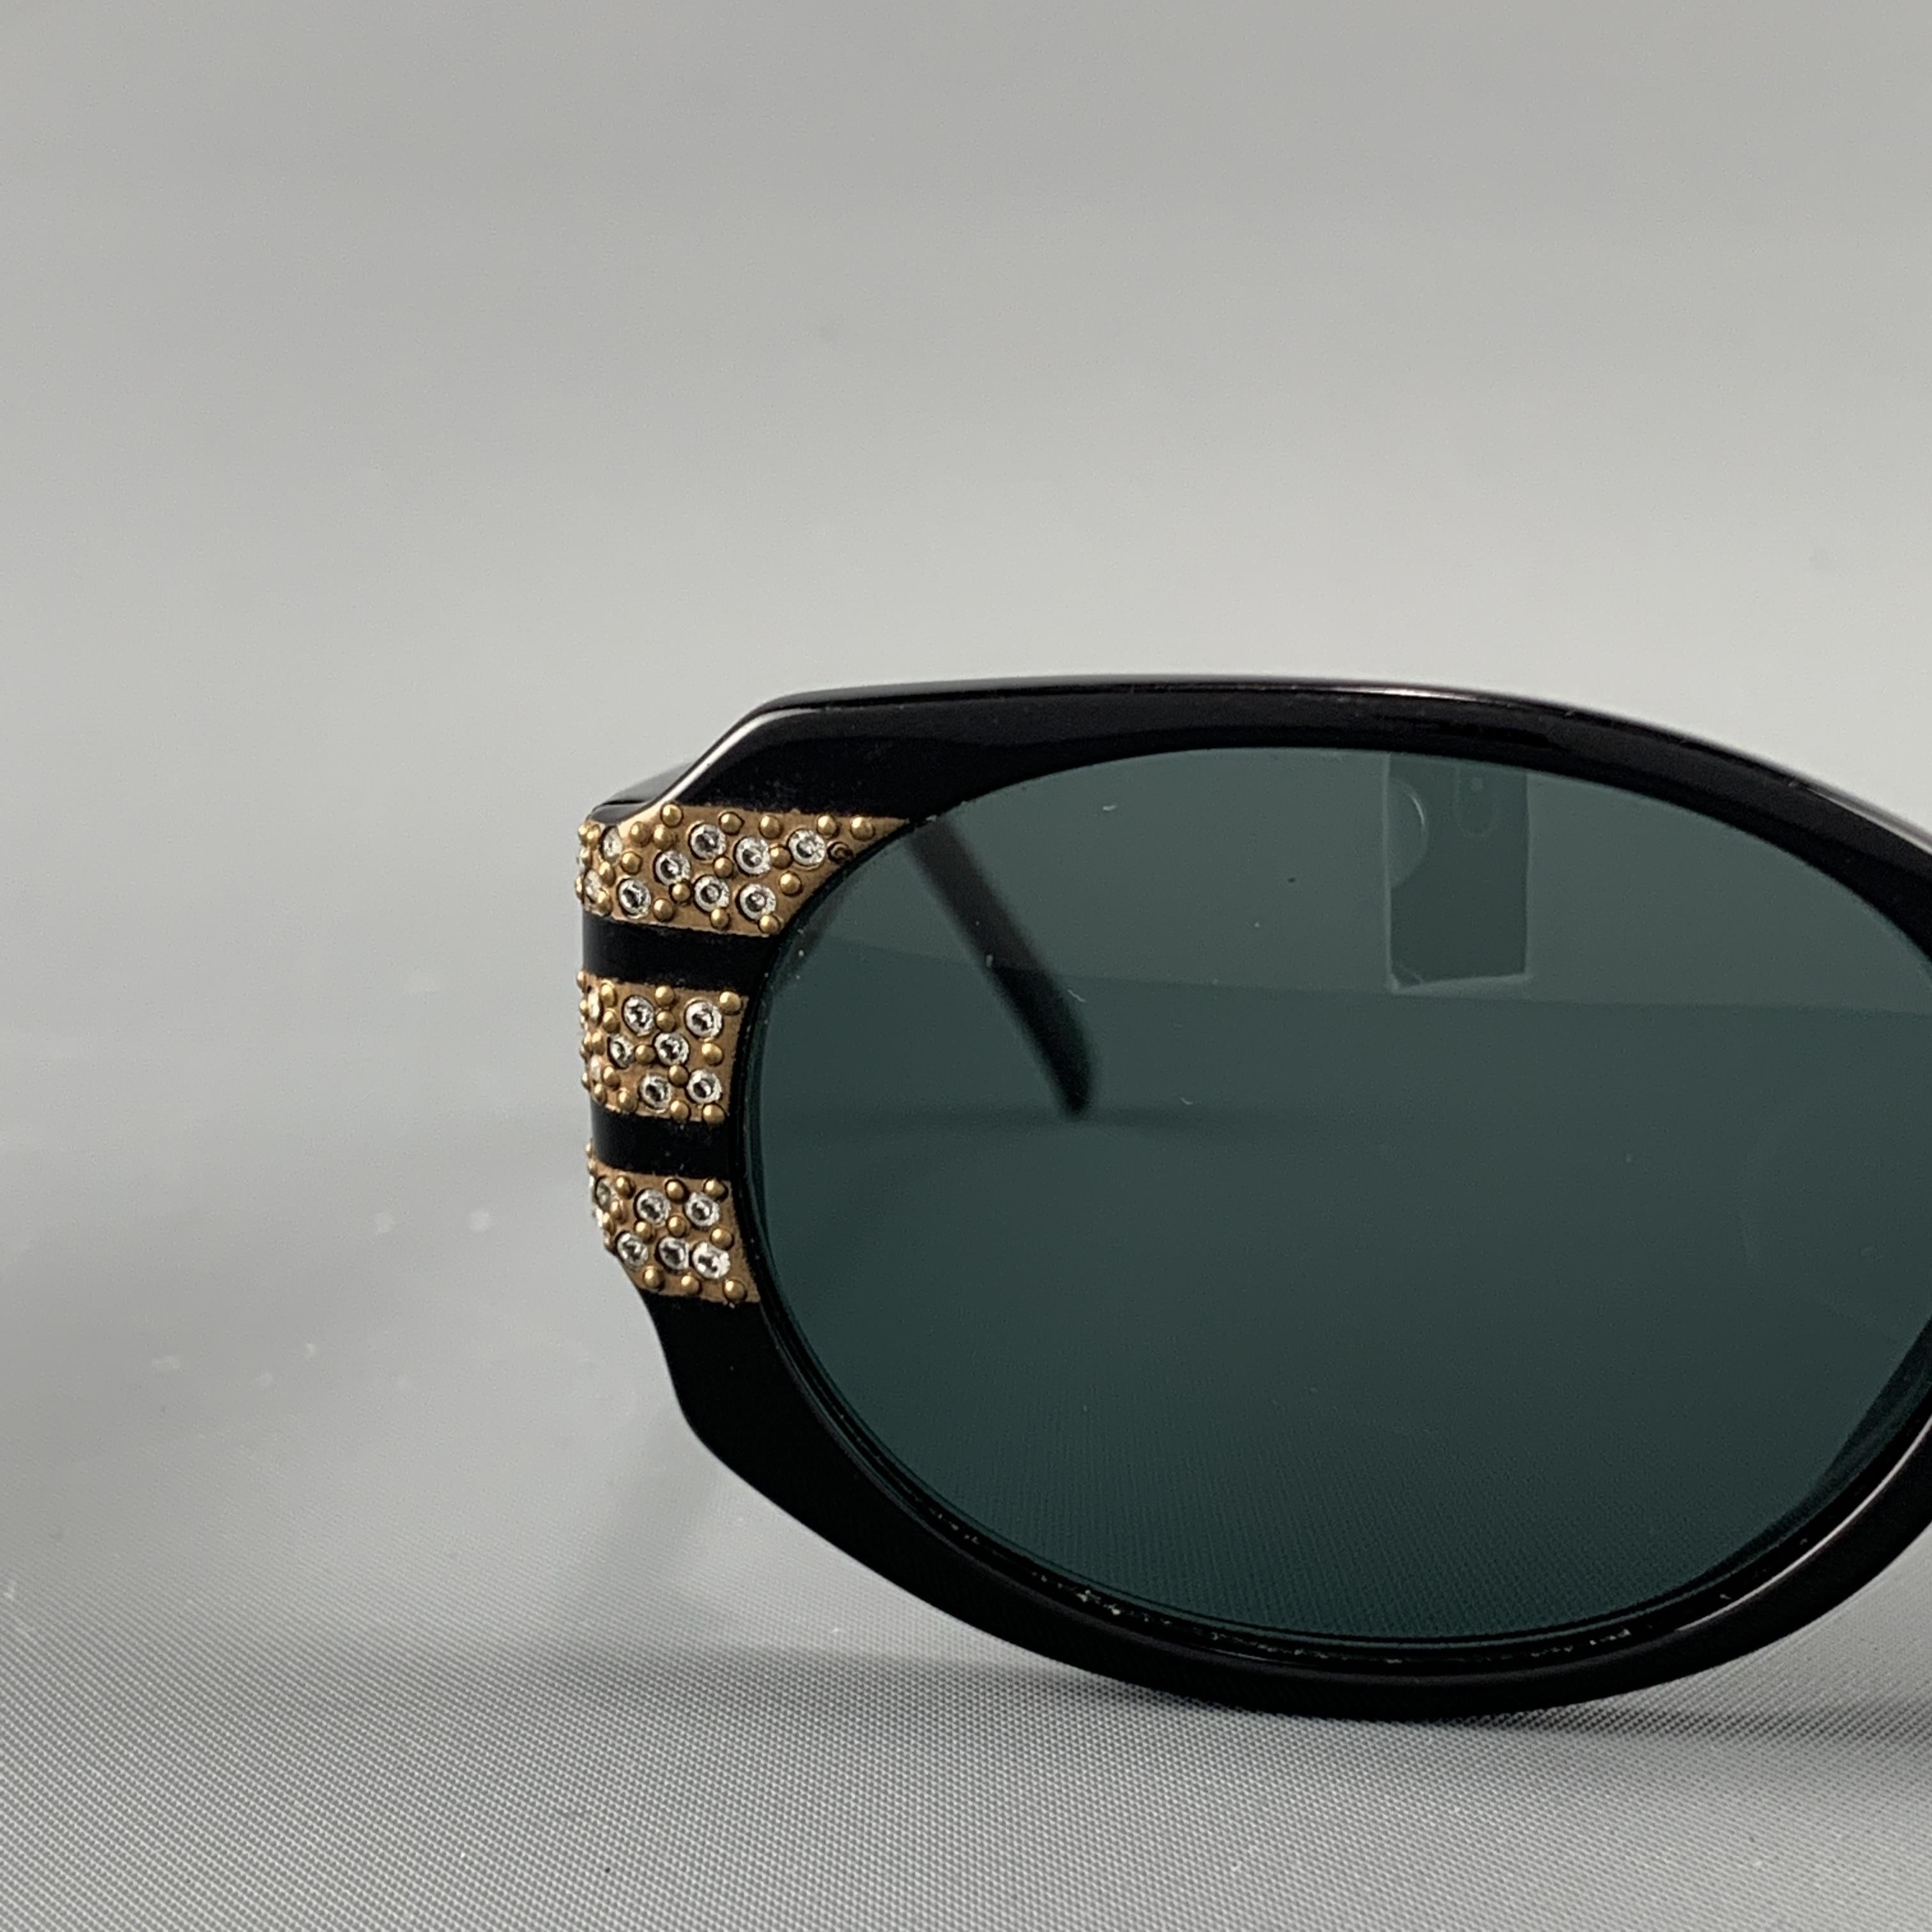 CAVIAR Jubilee series sunglasses come in black acetate with gold tone stripes with Swarovski crystals. 

Very Good Pre-Owned Condition.
Marked: M3255 56/47 140 C24

Measurements:

Length: 14 cm.
Height: 4.5 cm.